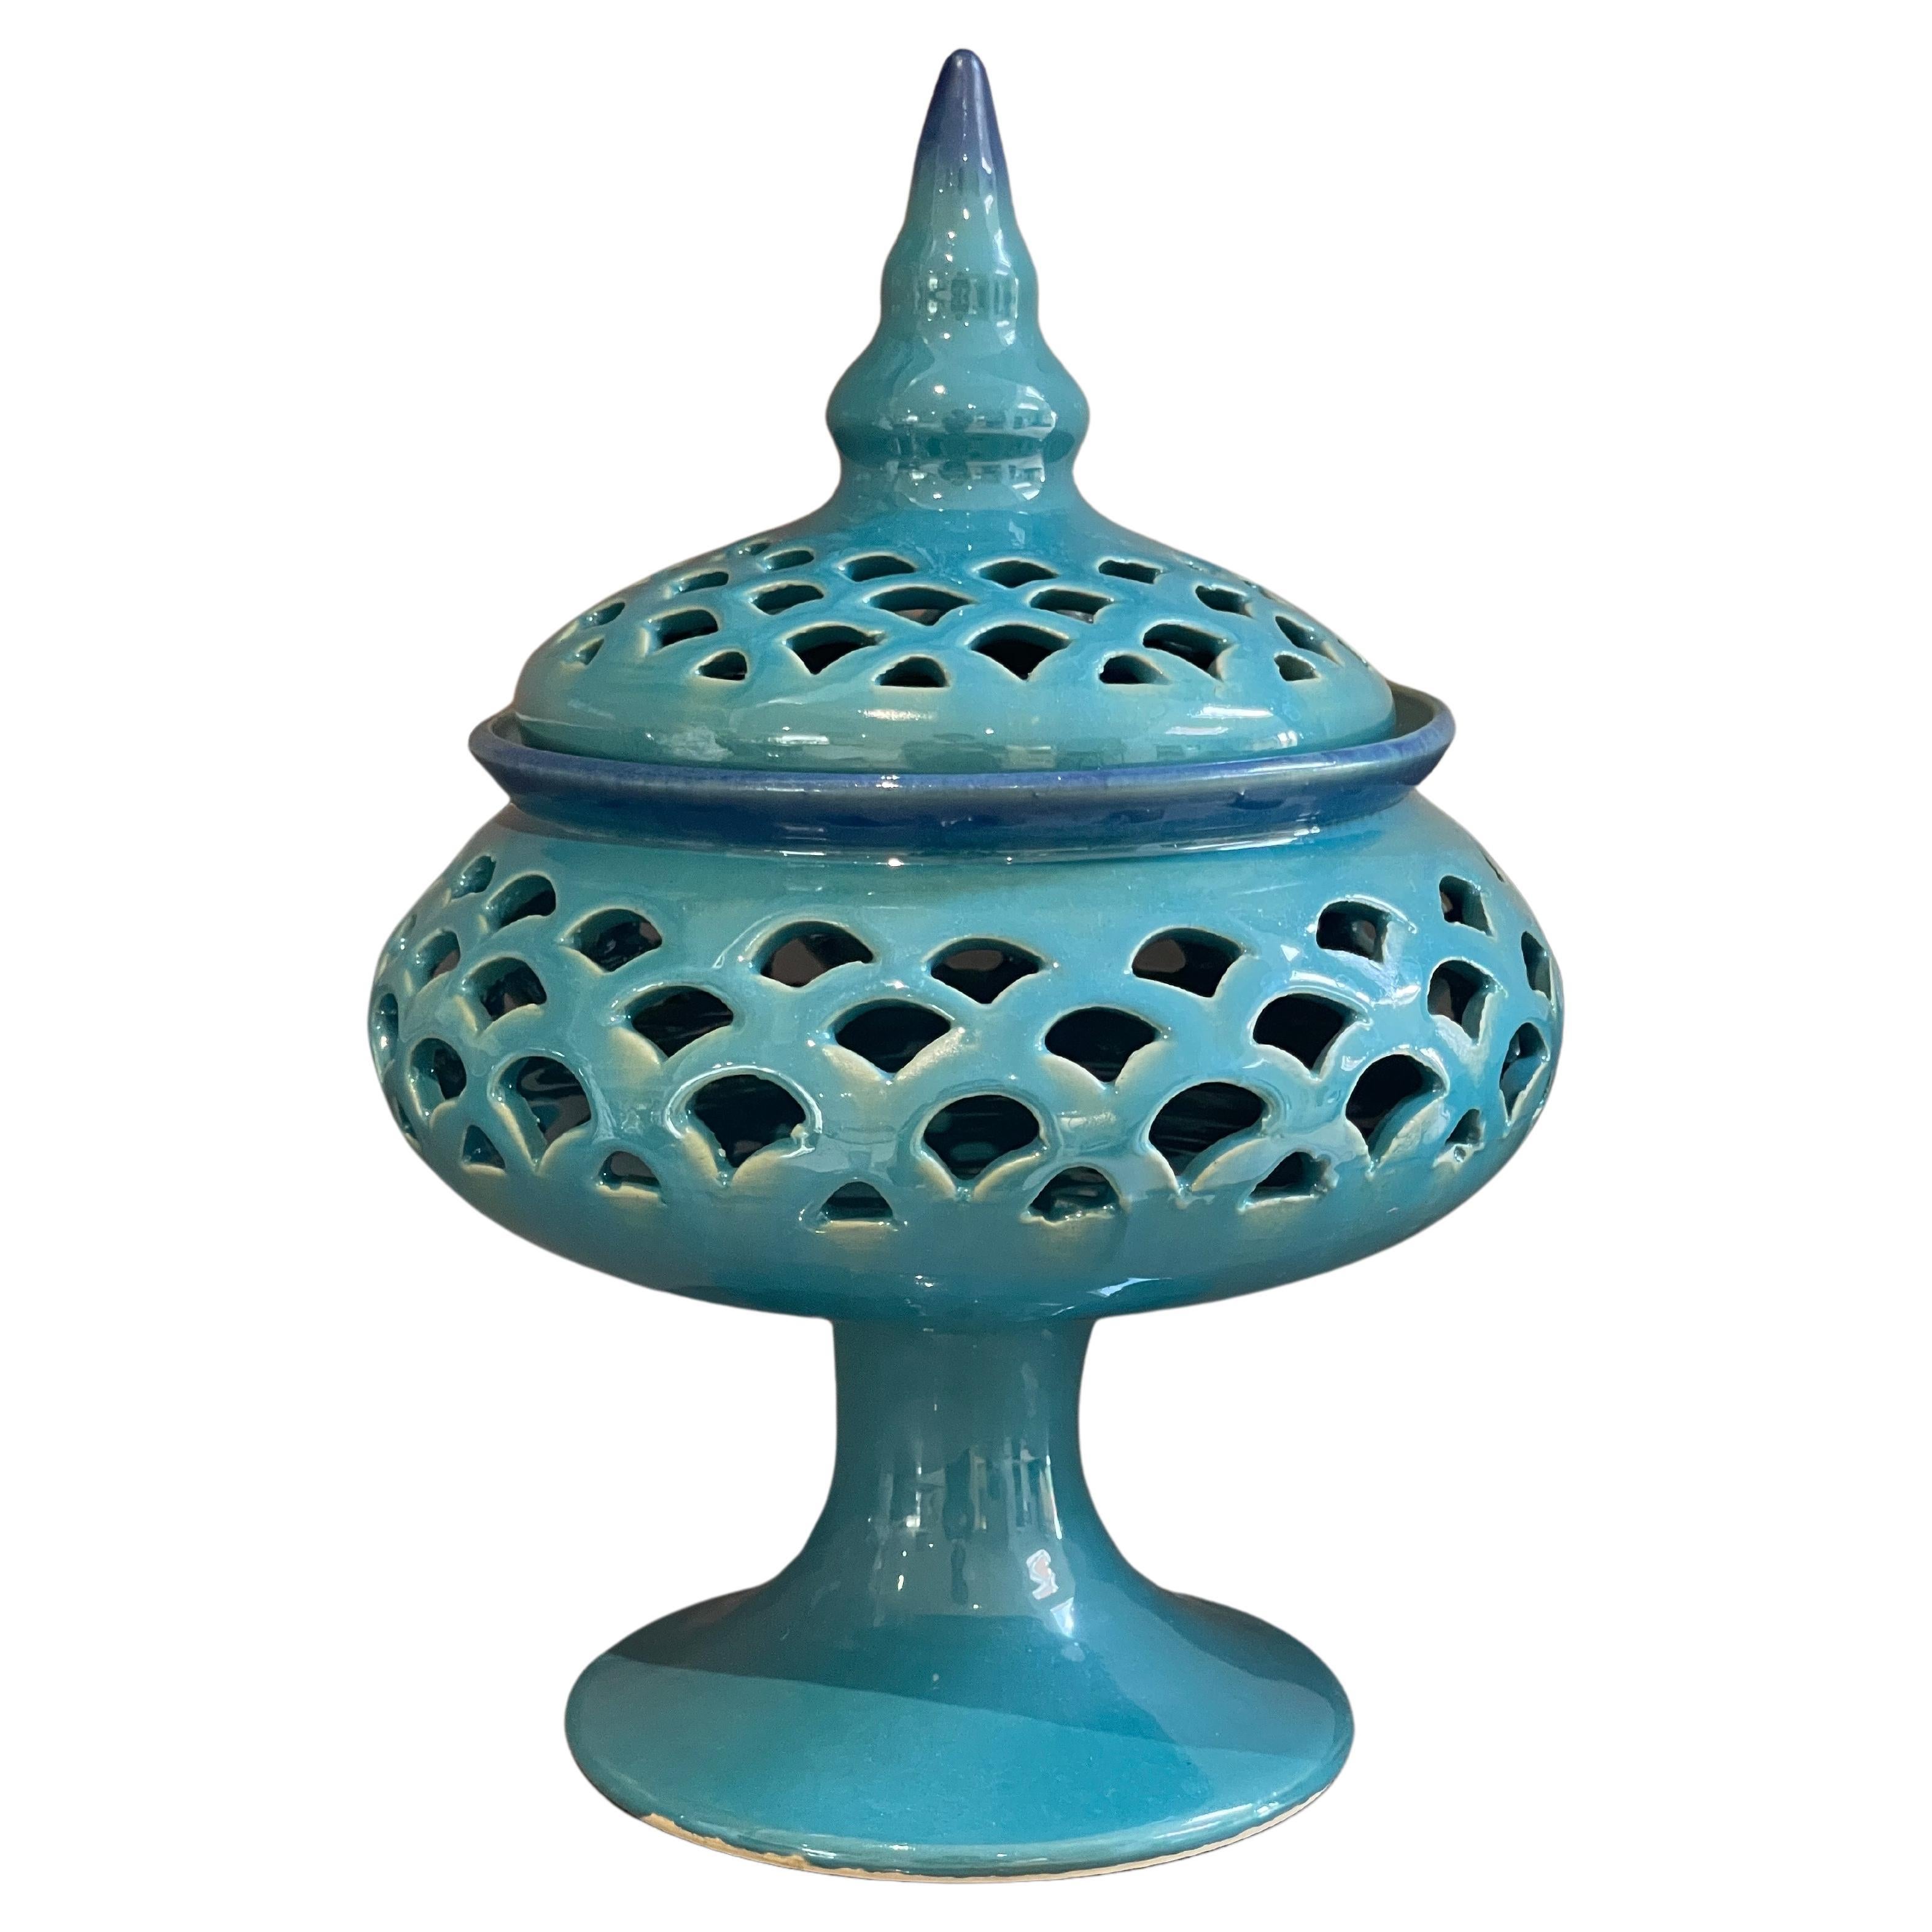 Candle Holder Hand Crafted Blue Ceramic Torches With Stand &Lid For Sale